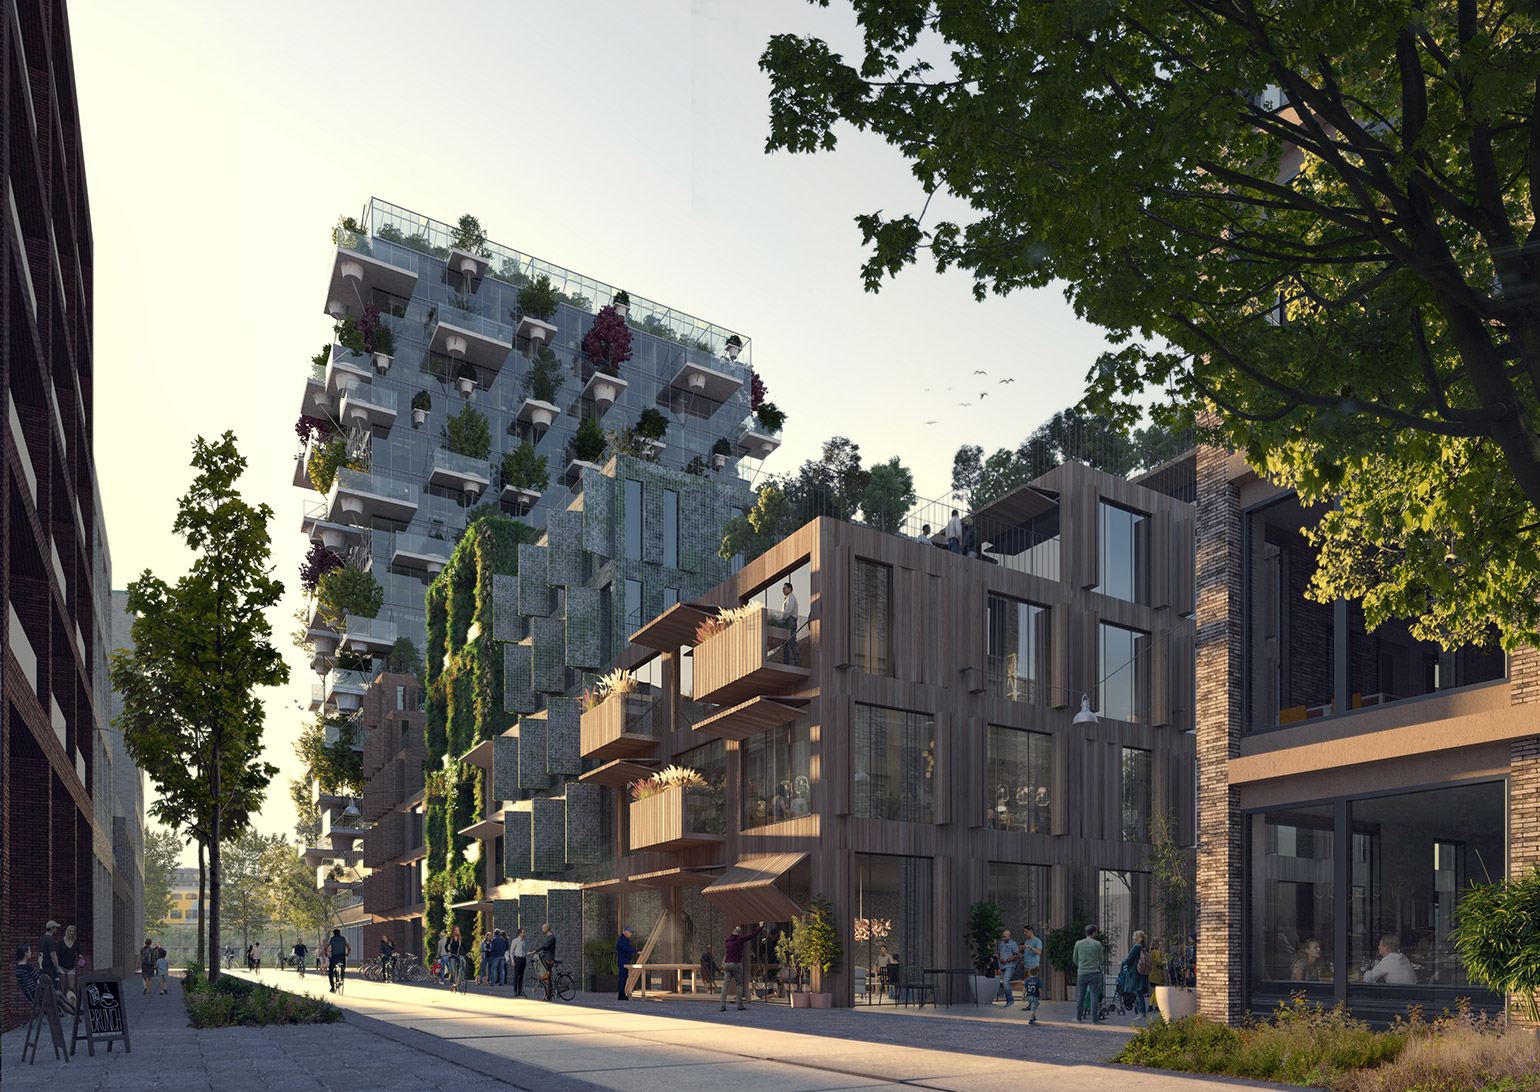 MVRDV Designed Green and People-Focused Residential Complex in Amsterdam